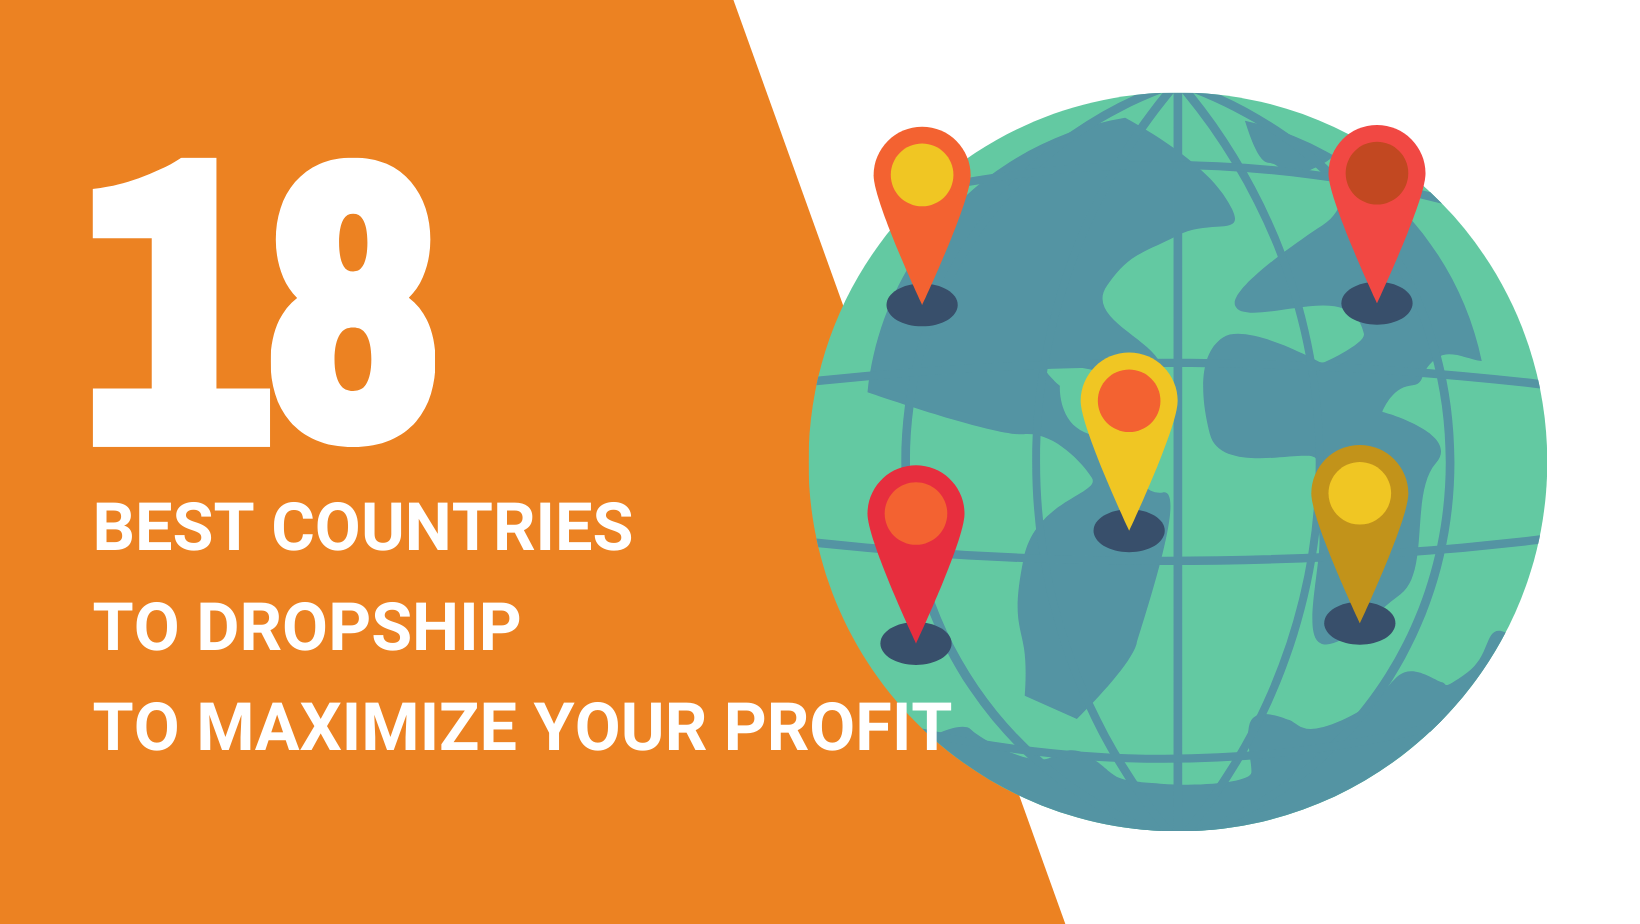 18 BEST COUNTRIES TO DROPSHIP TO MAXIMIZE YOUR PROFIT